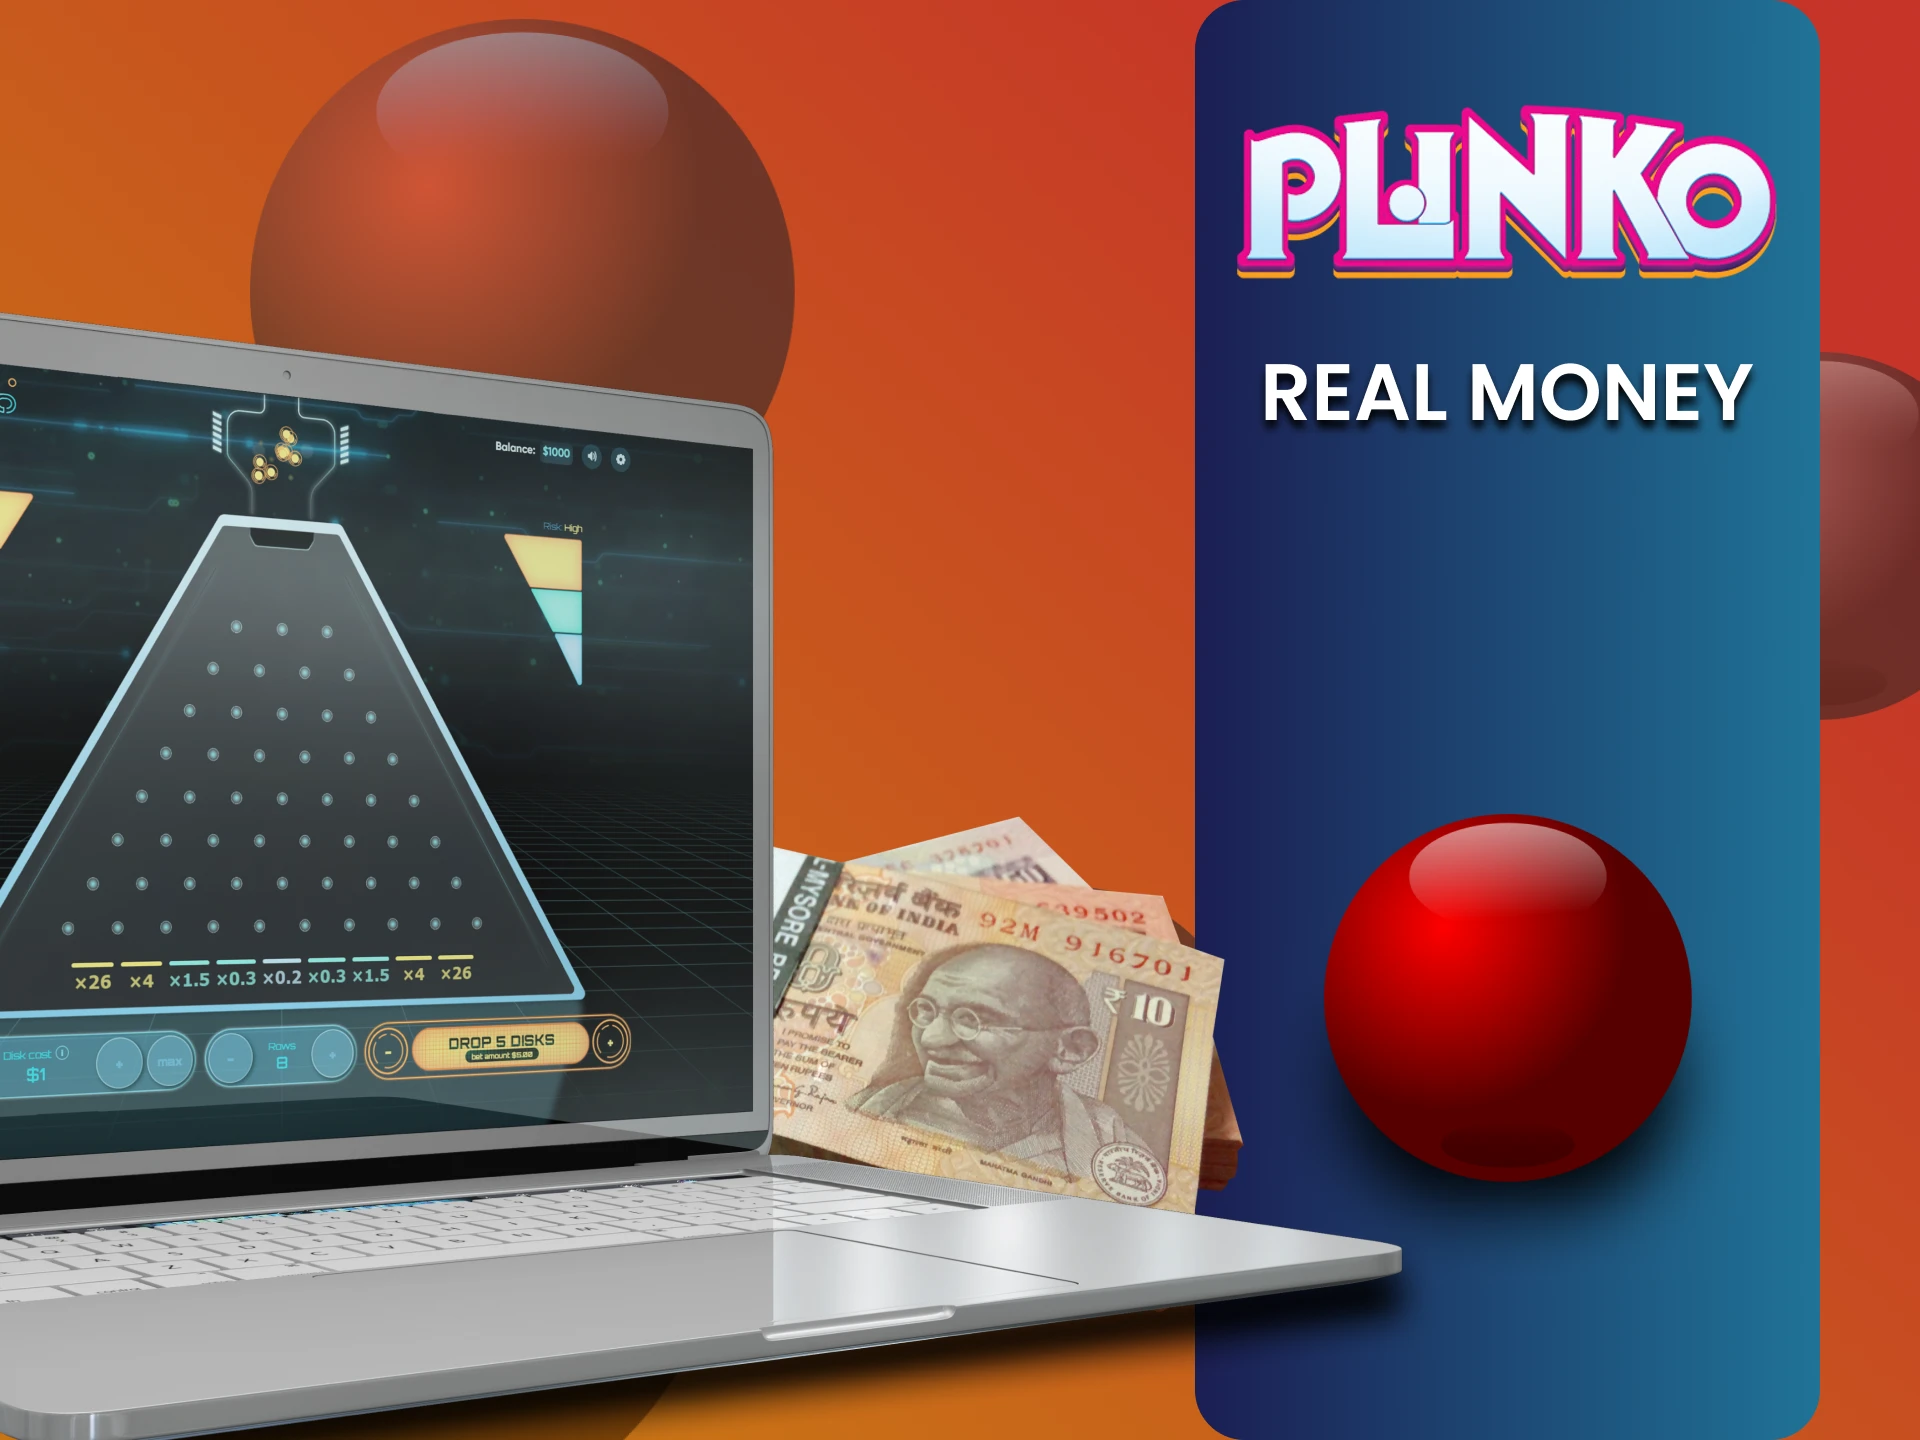 In Plinko you can win real money.